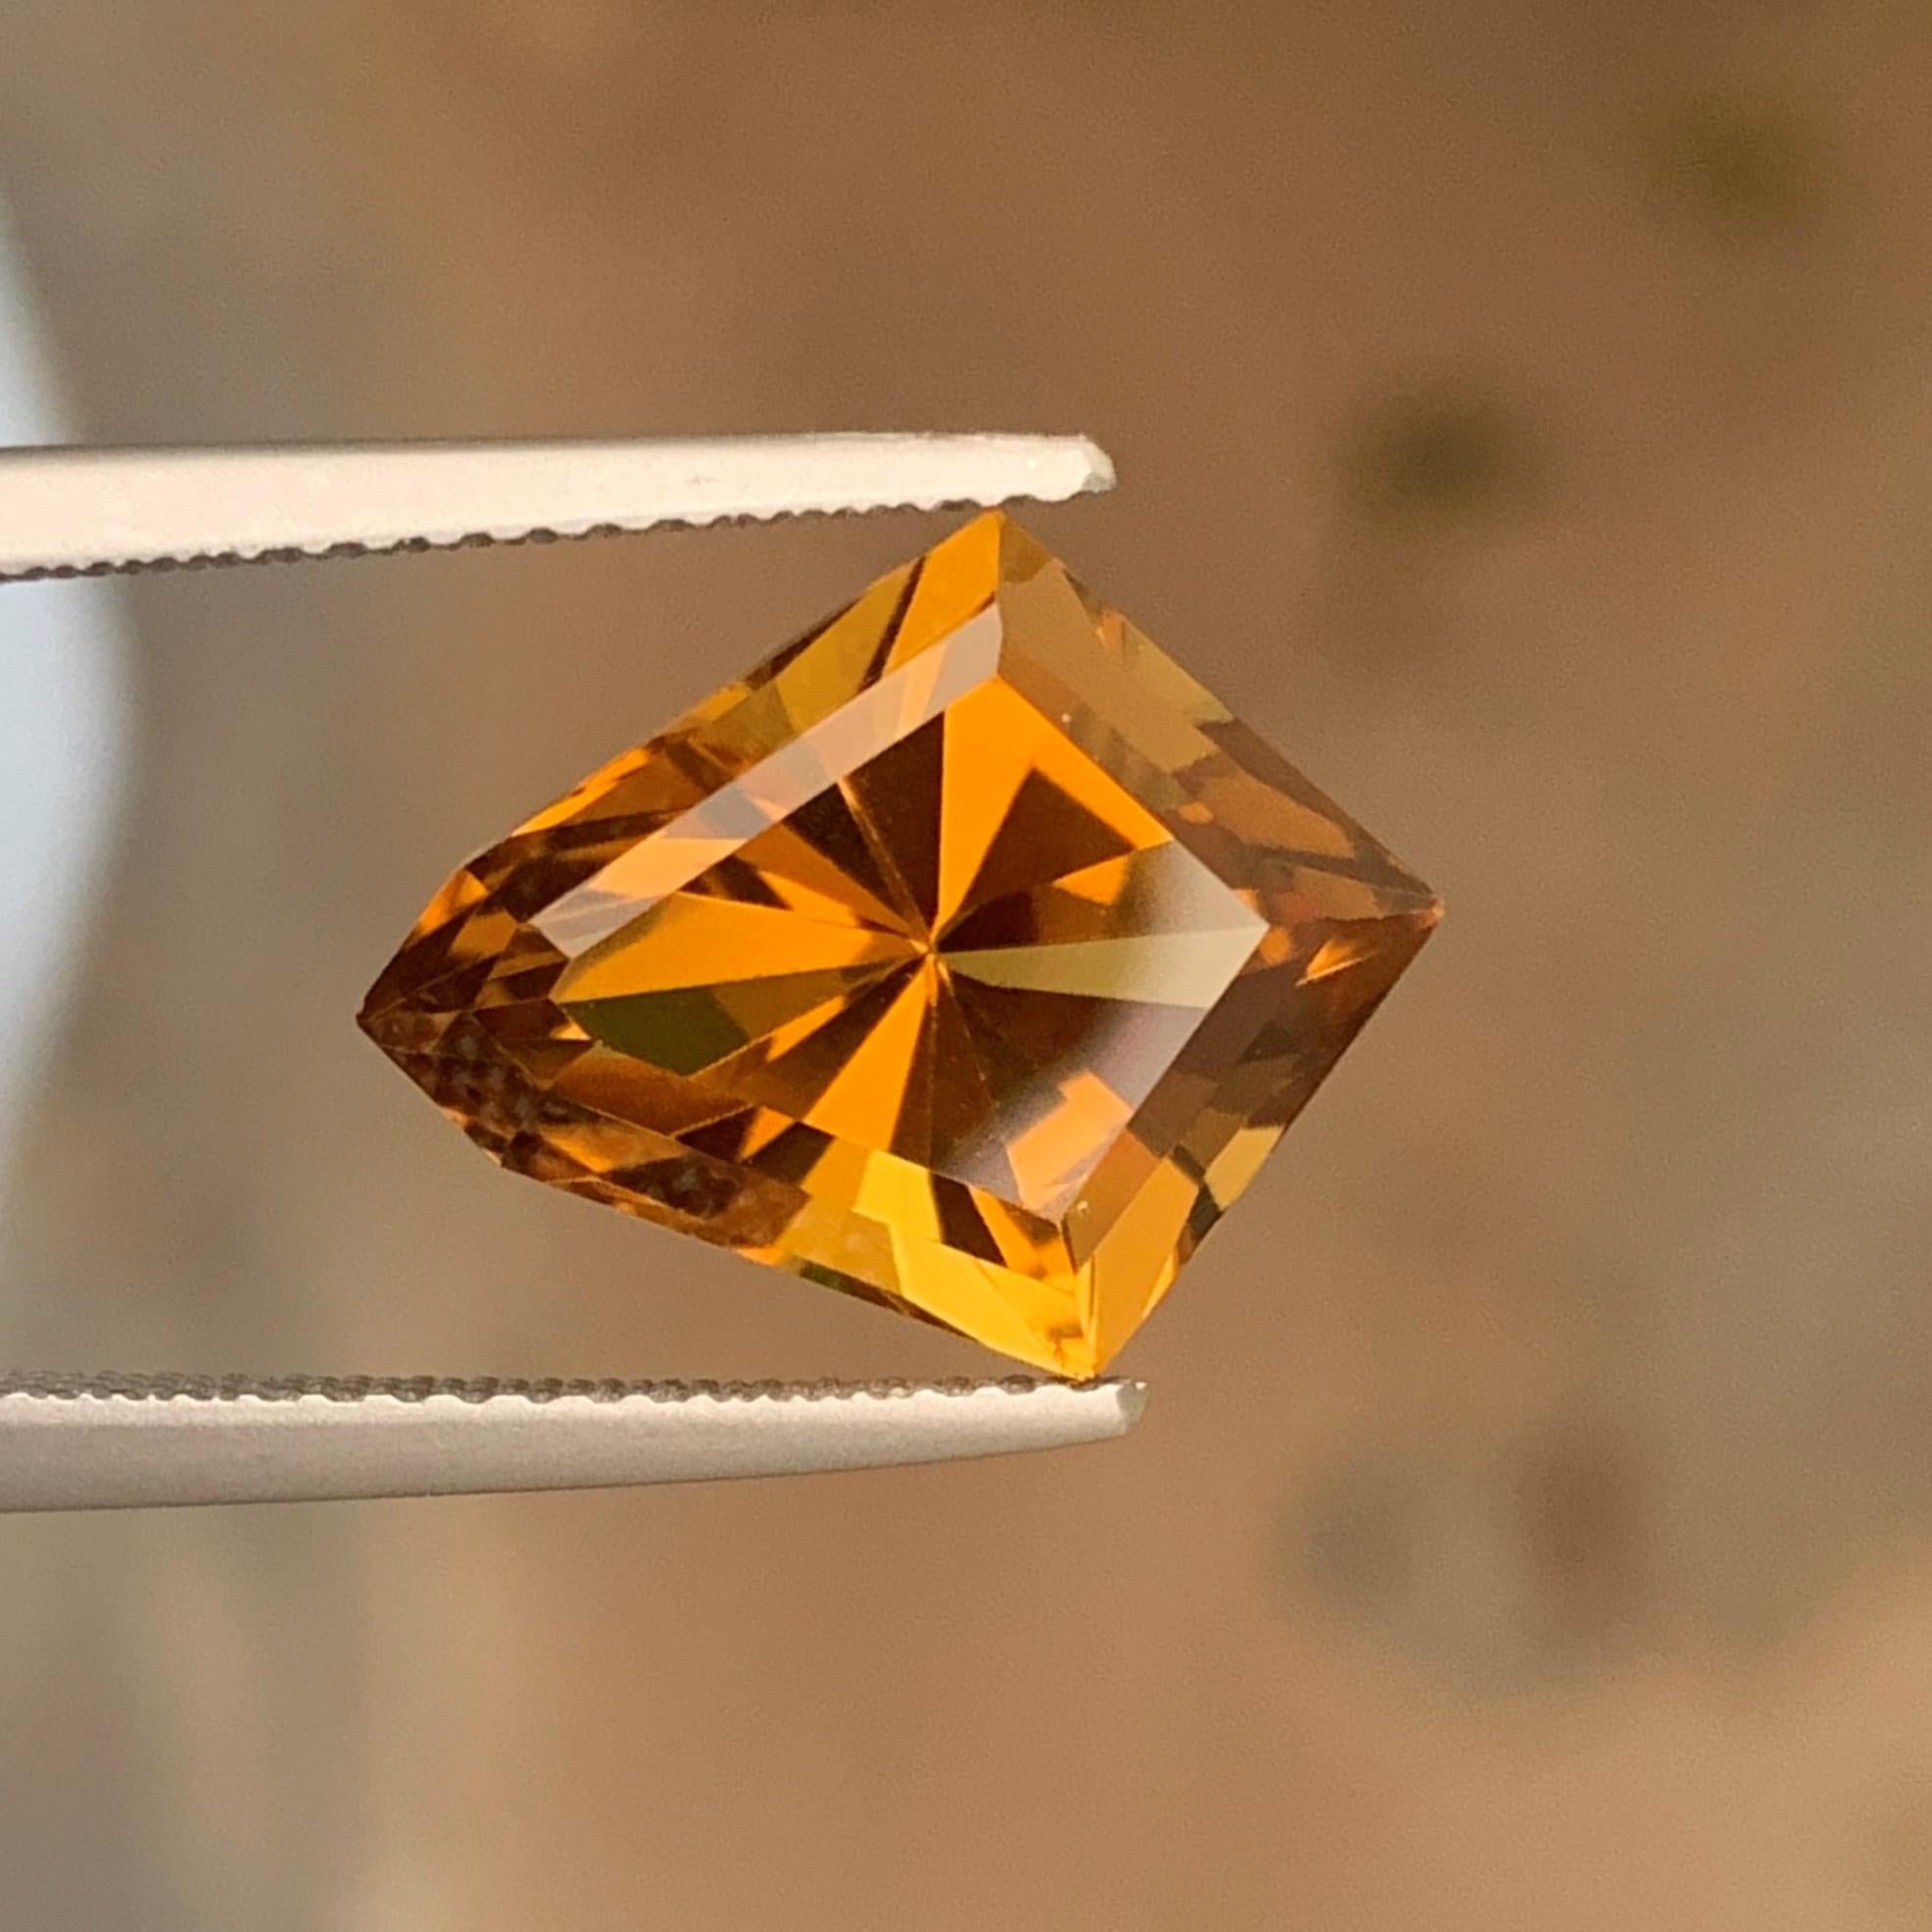 Arts and Crafts 4.80 Carat Natural Fancy Cut Kite Shape Loose Citrine Gemstone from Brazil For Sale